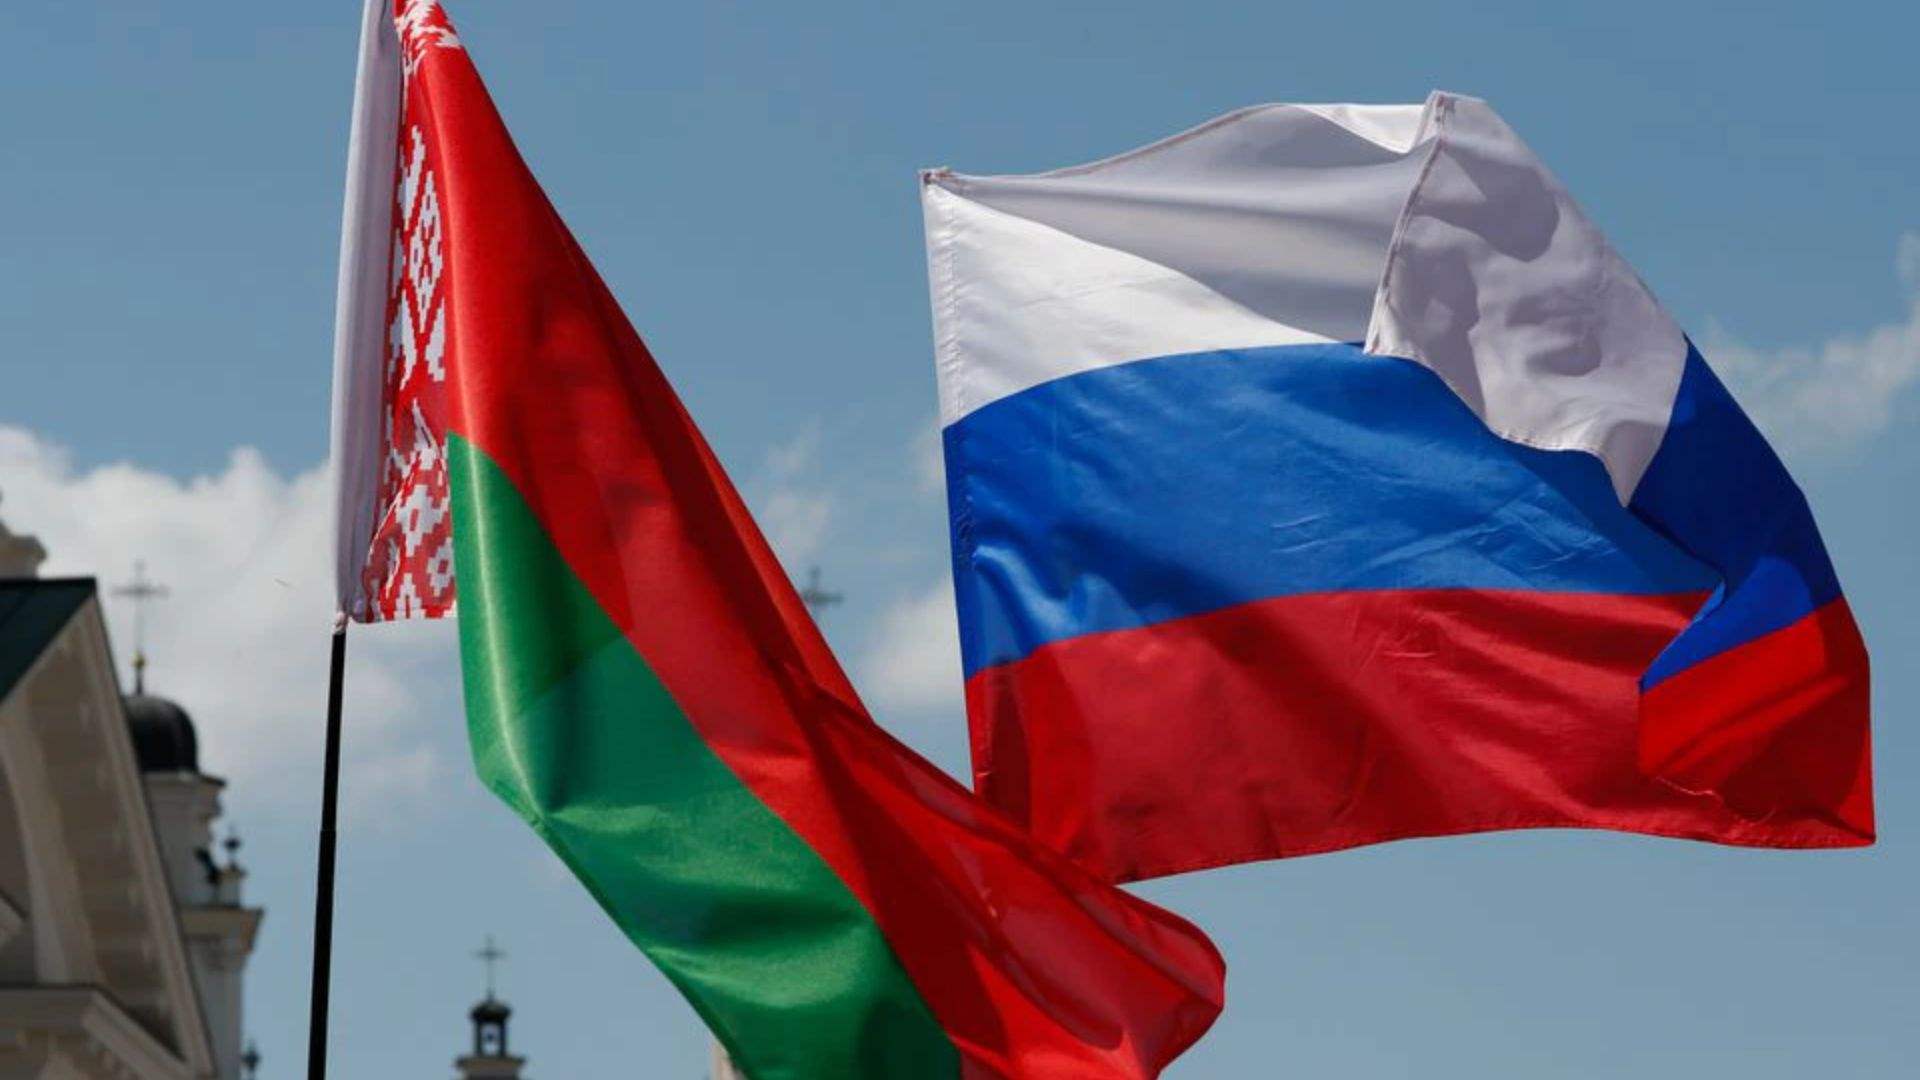 Russia, Belarus sign document on tactical nuclear weapon deployment in Belarus